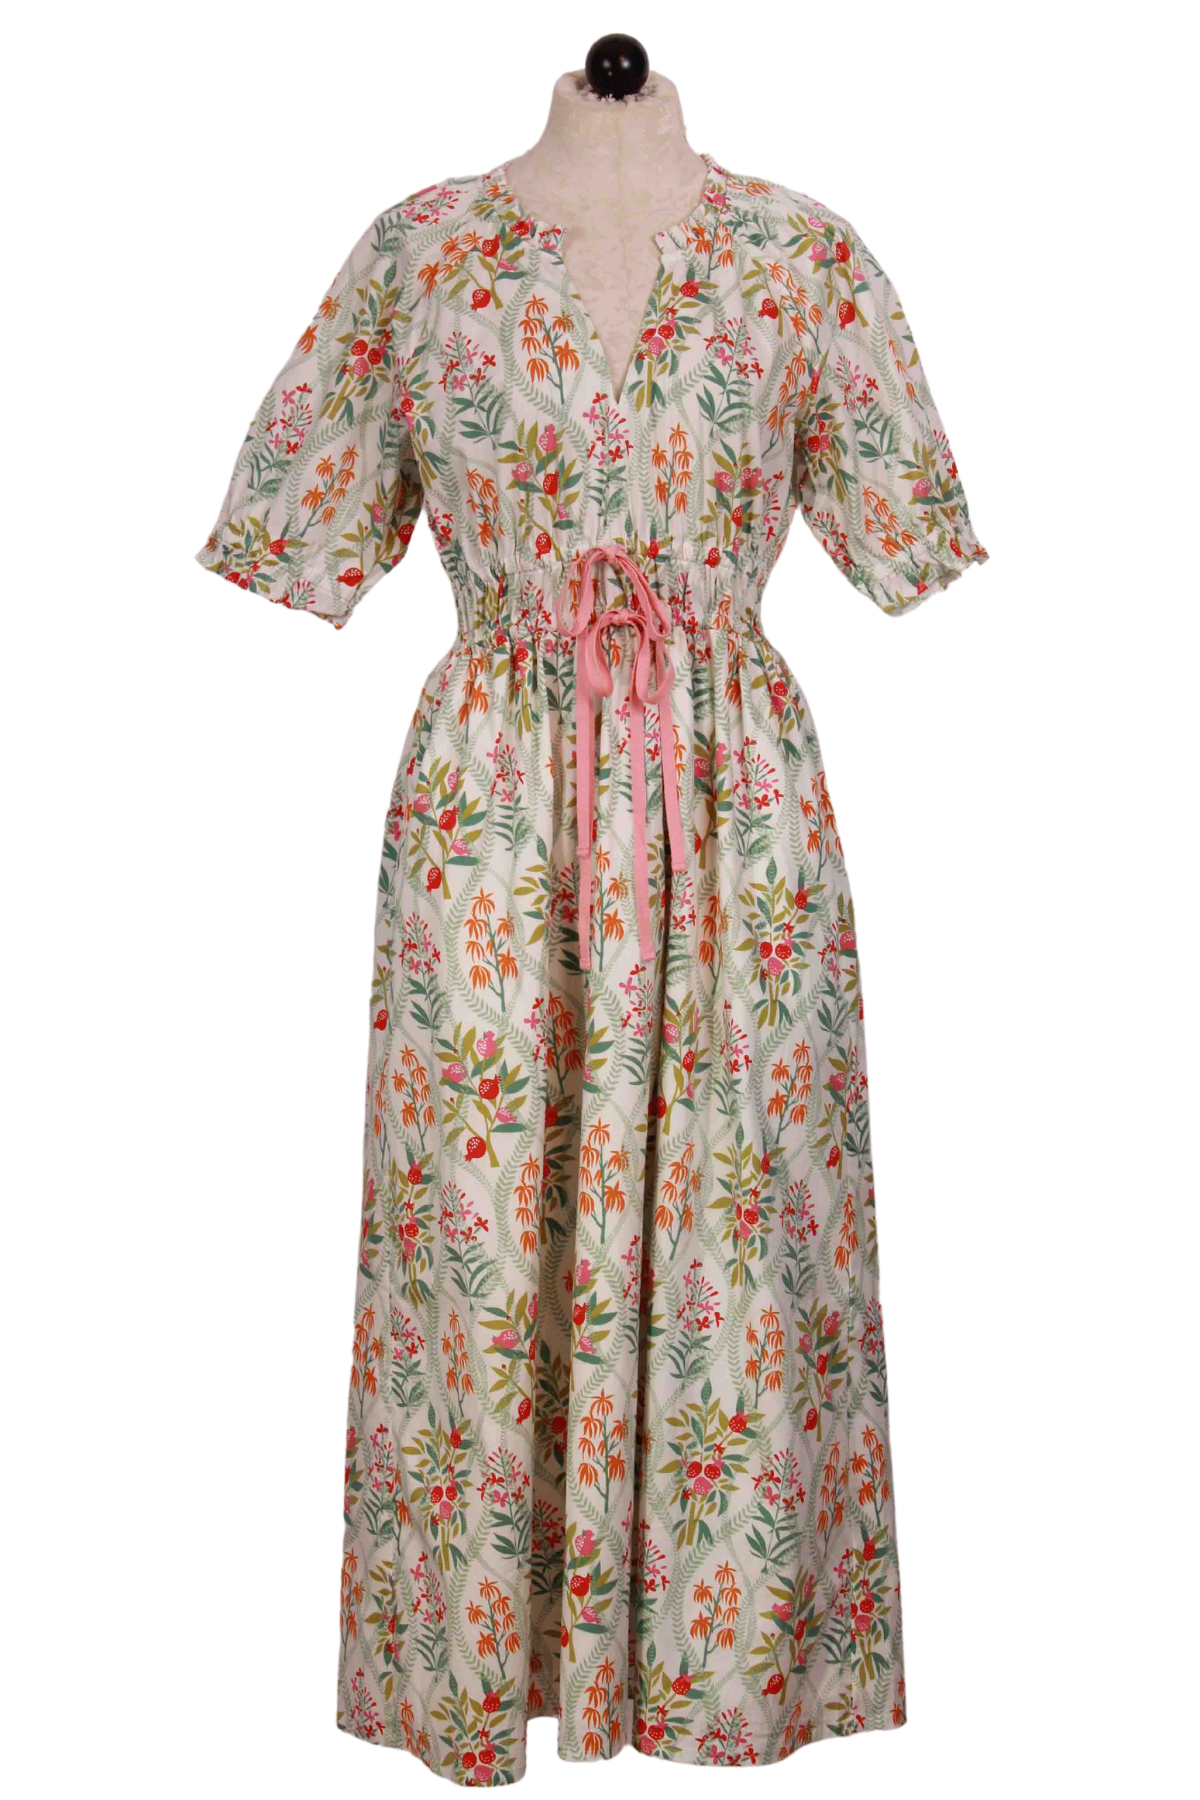 Queenie Topiary White Floral Joanie Midi Length Dress by Spartina